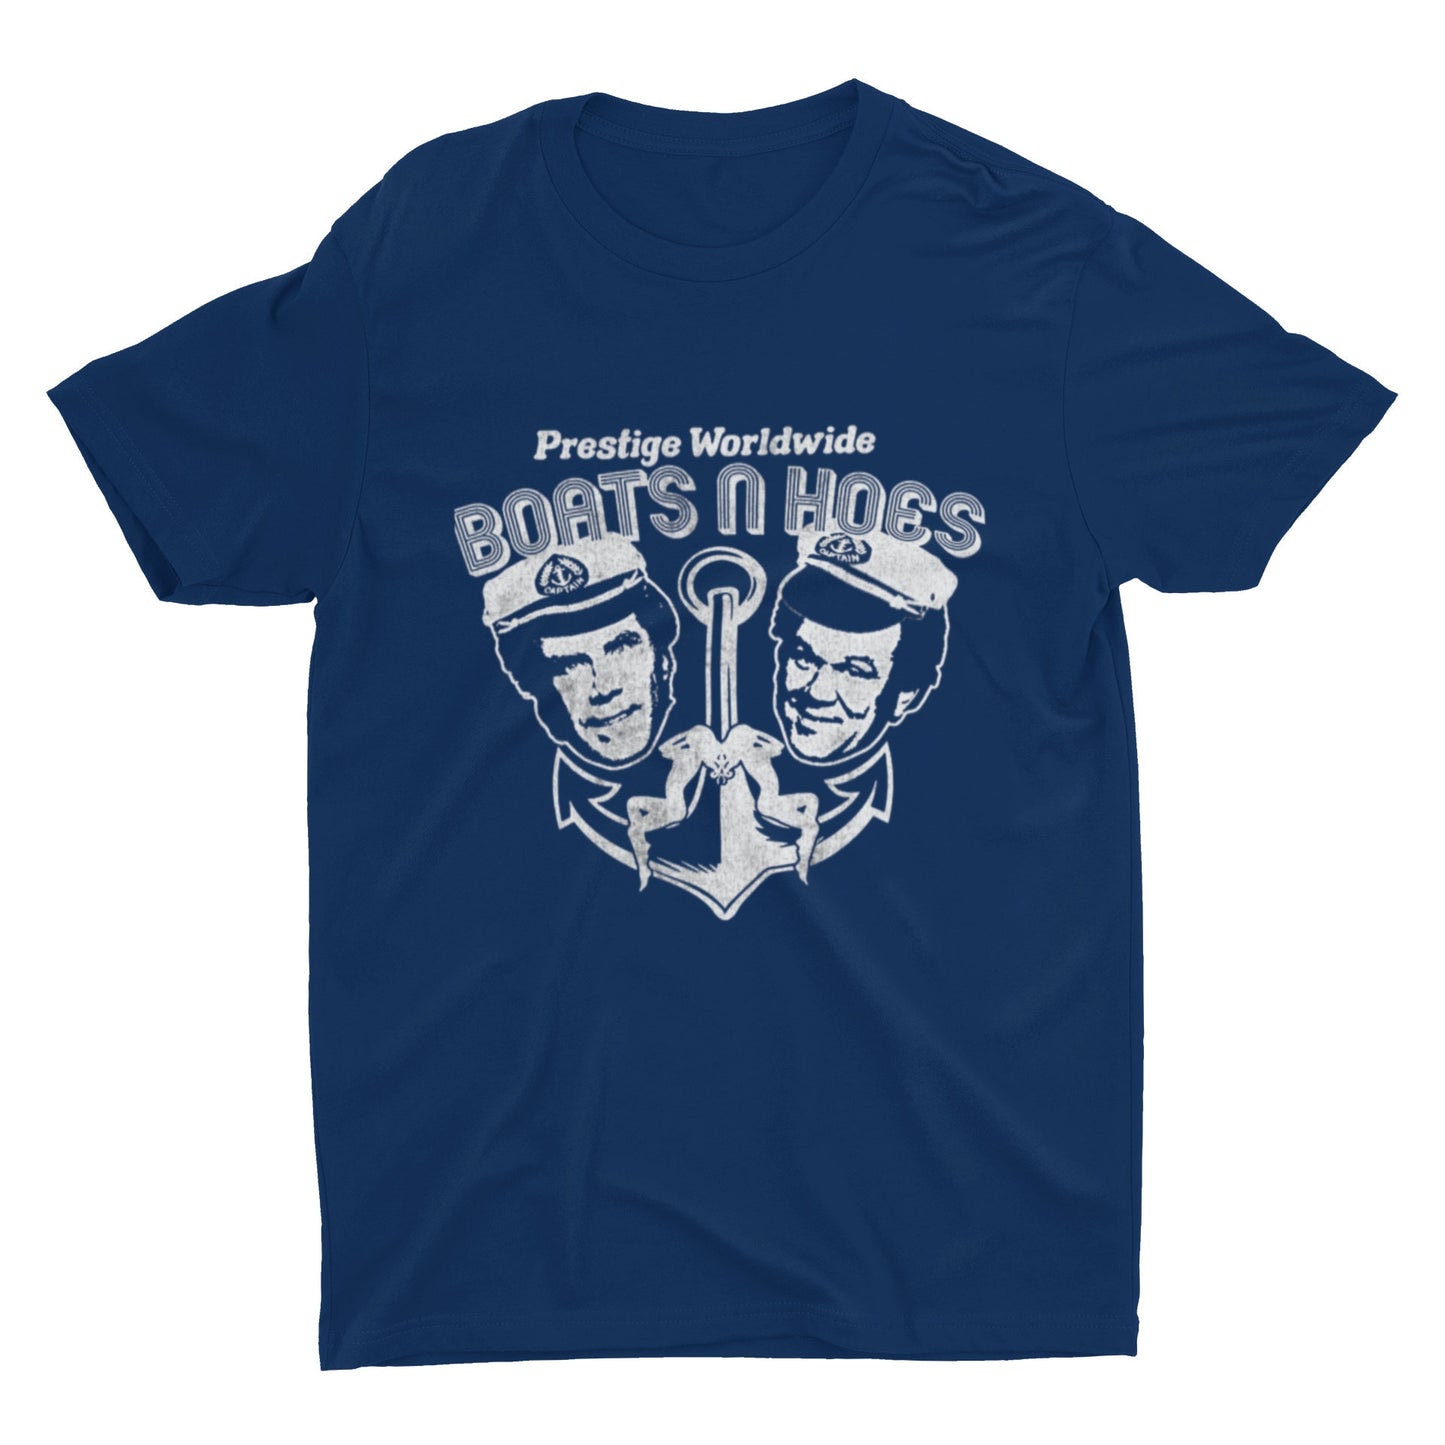 Step Brothers Boats N Hoes T Shirt | Step Brothers T Shirt | Will Ferrell | John C Reilly